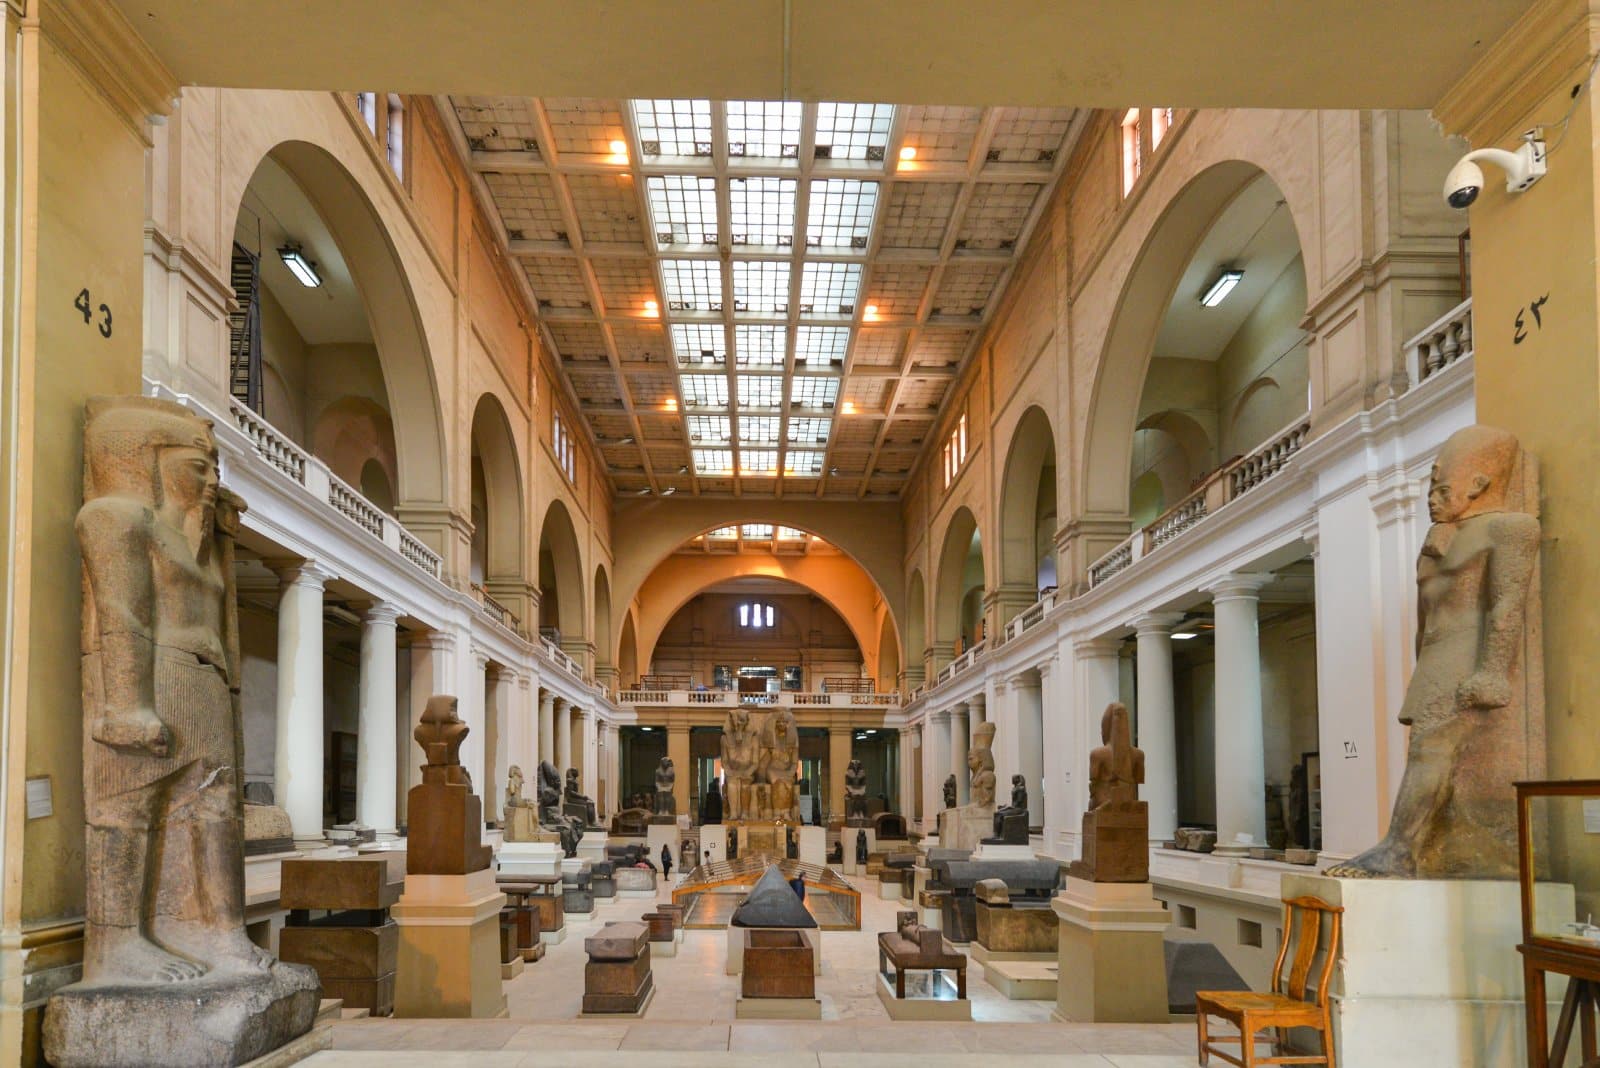 <p class="wp-caption-text">Image Credit: Shutterstock / Orhan Cam</p>  <p><span>Located in the heart of Cairo, the Egyptian Museum is a treasure trove of artifacts, offering a comprehensive overview of Egyptian history from the Predynastic period through to the Greco-Roman era. With over 120,000 items, the museum boasts an extensive collection that includes mummies, sarcophagi, pottery, jewelry, and, of course, the treasures of Tutankhamun. Among its most captivating exhibits are the gold mask of Tutankhamun, the Royal Mummy Room containing the preserved remains of pharaohs and nobles, and the extensive collection of papyrus and coins. The museum allows you to understand the depth and richness of Egyptian civilization, its beliefs, art, and daily life.</span> </p>